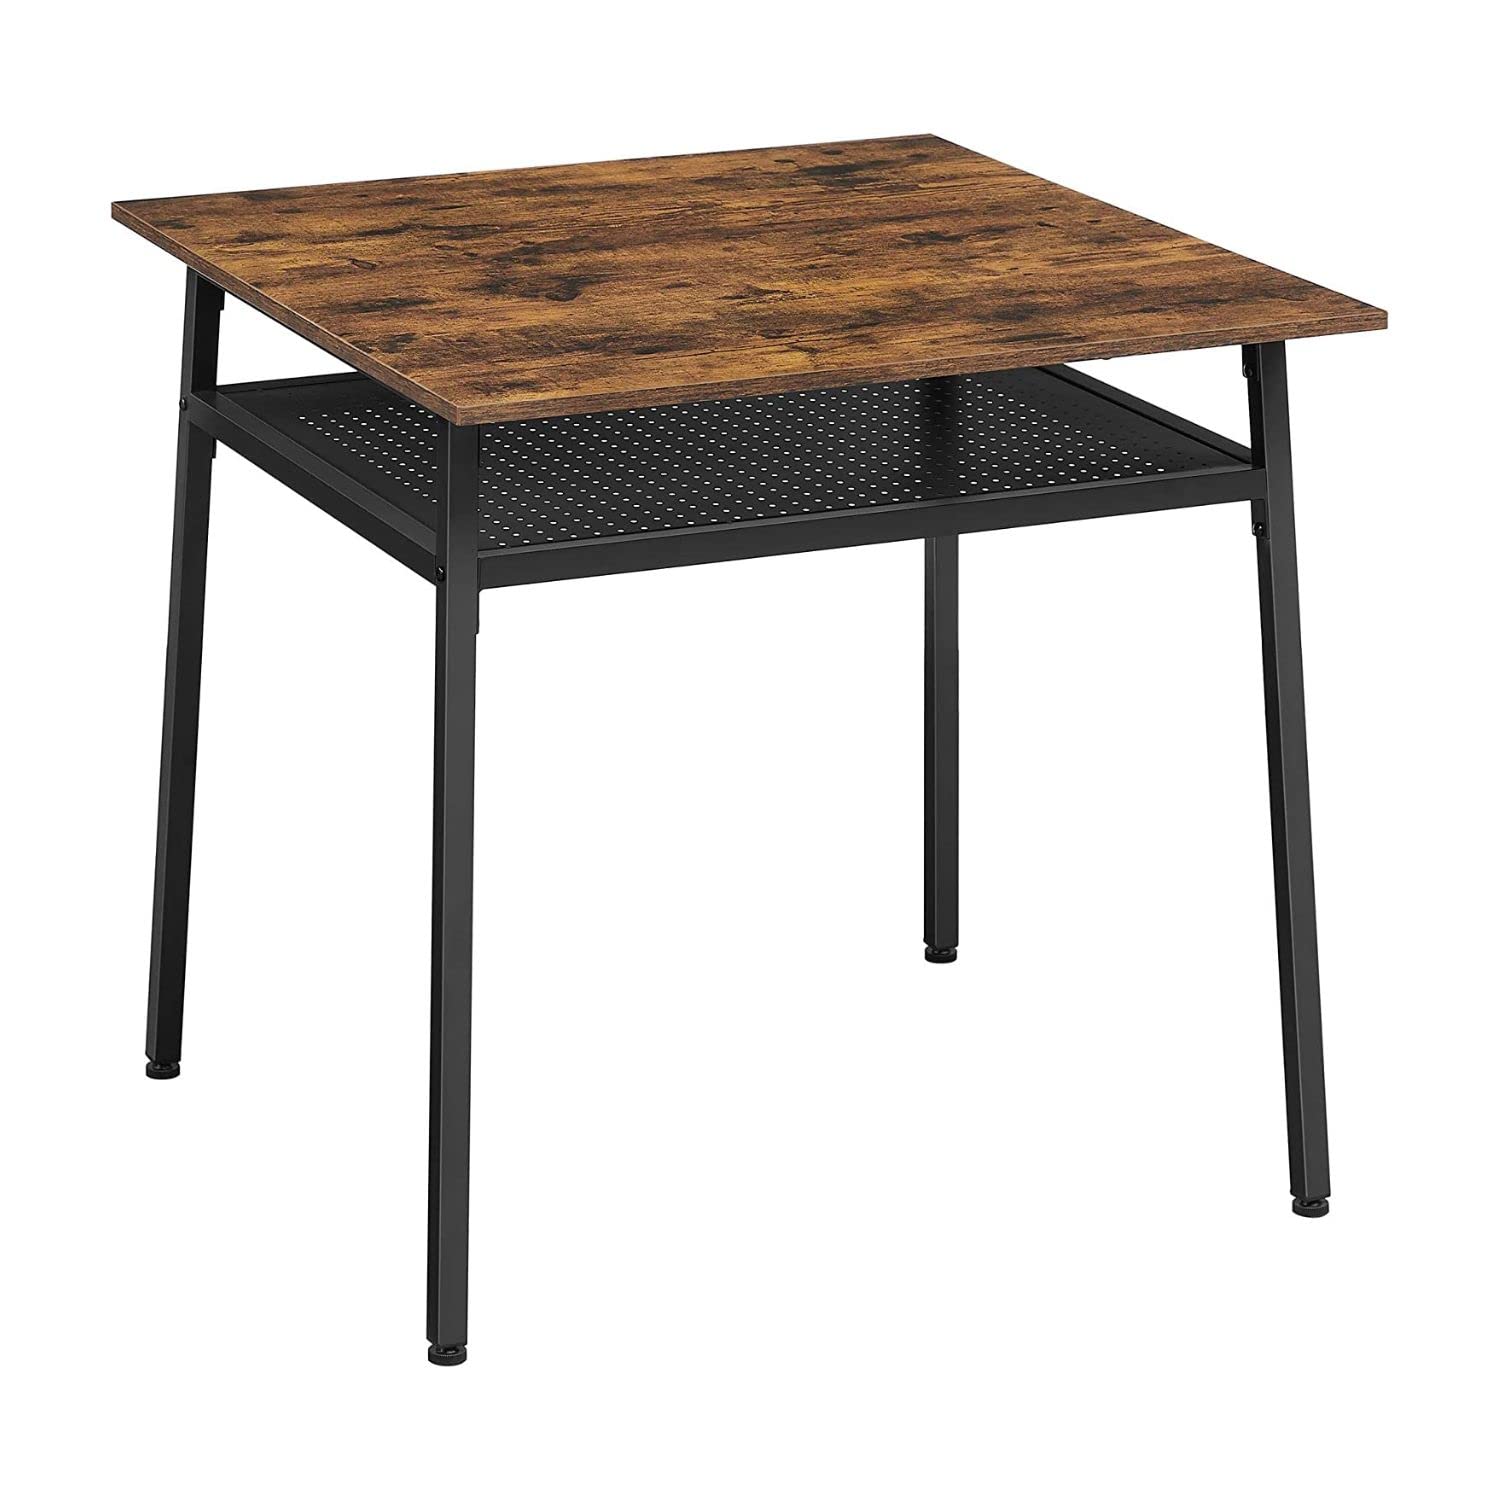 Brown Dining Table Square Office Desk with Storage Compartment